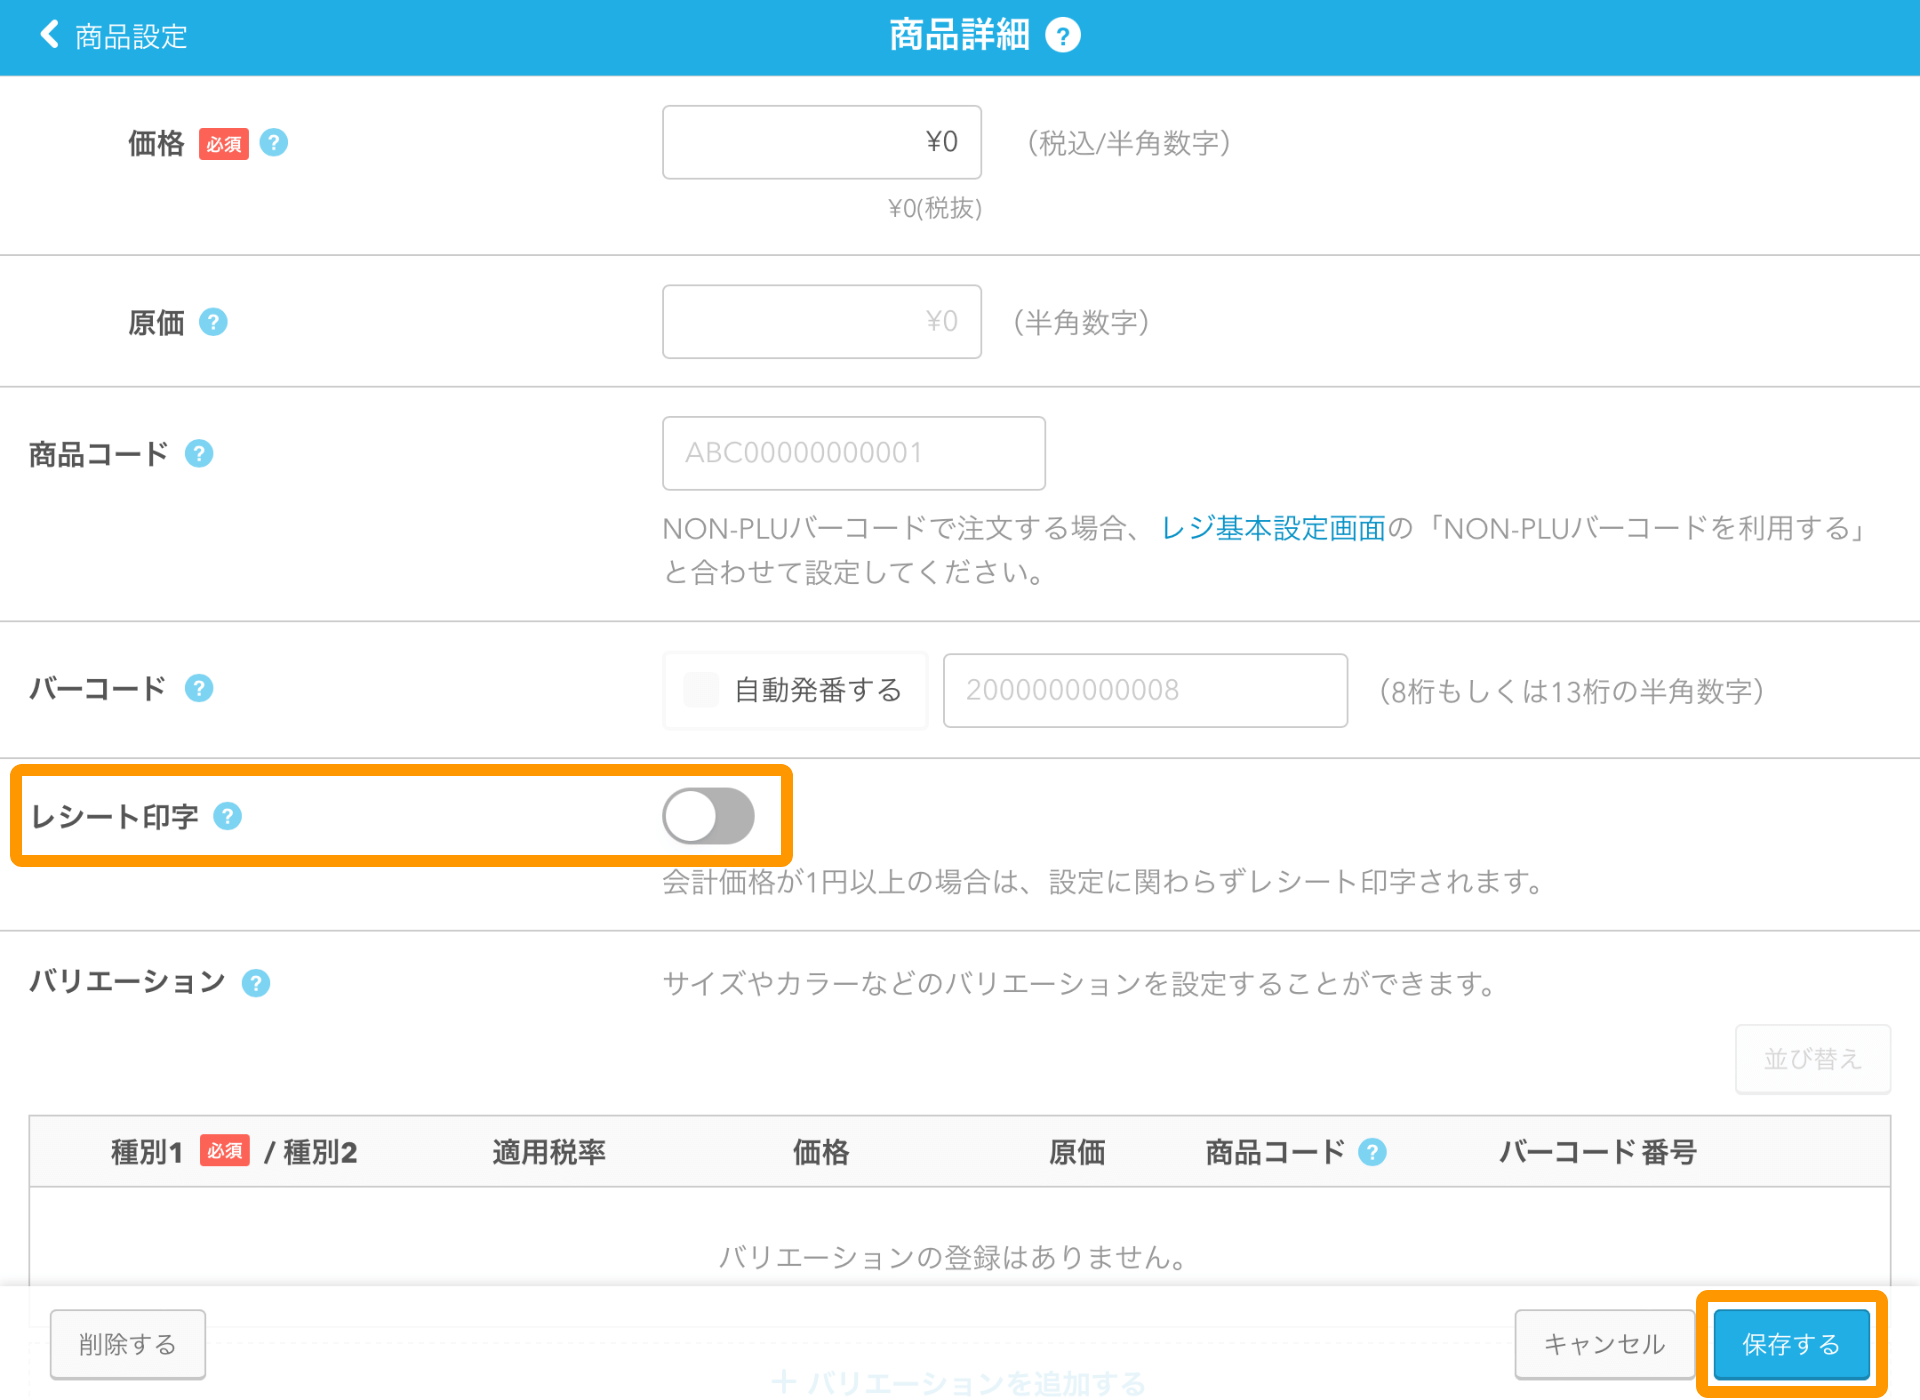 Airレジ 商品詳細画面 arg_360058087233_03.png